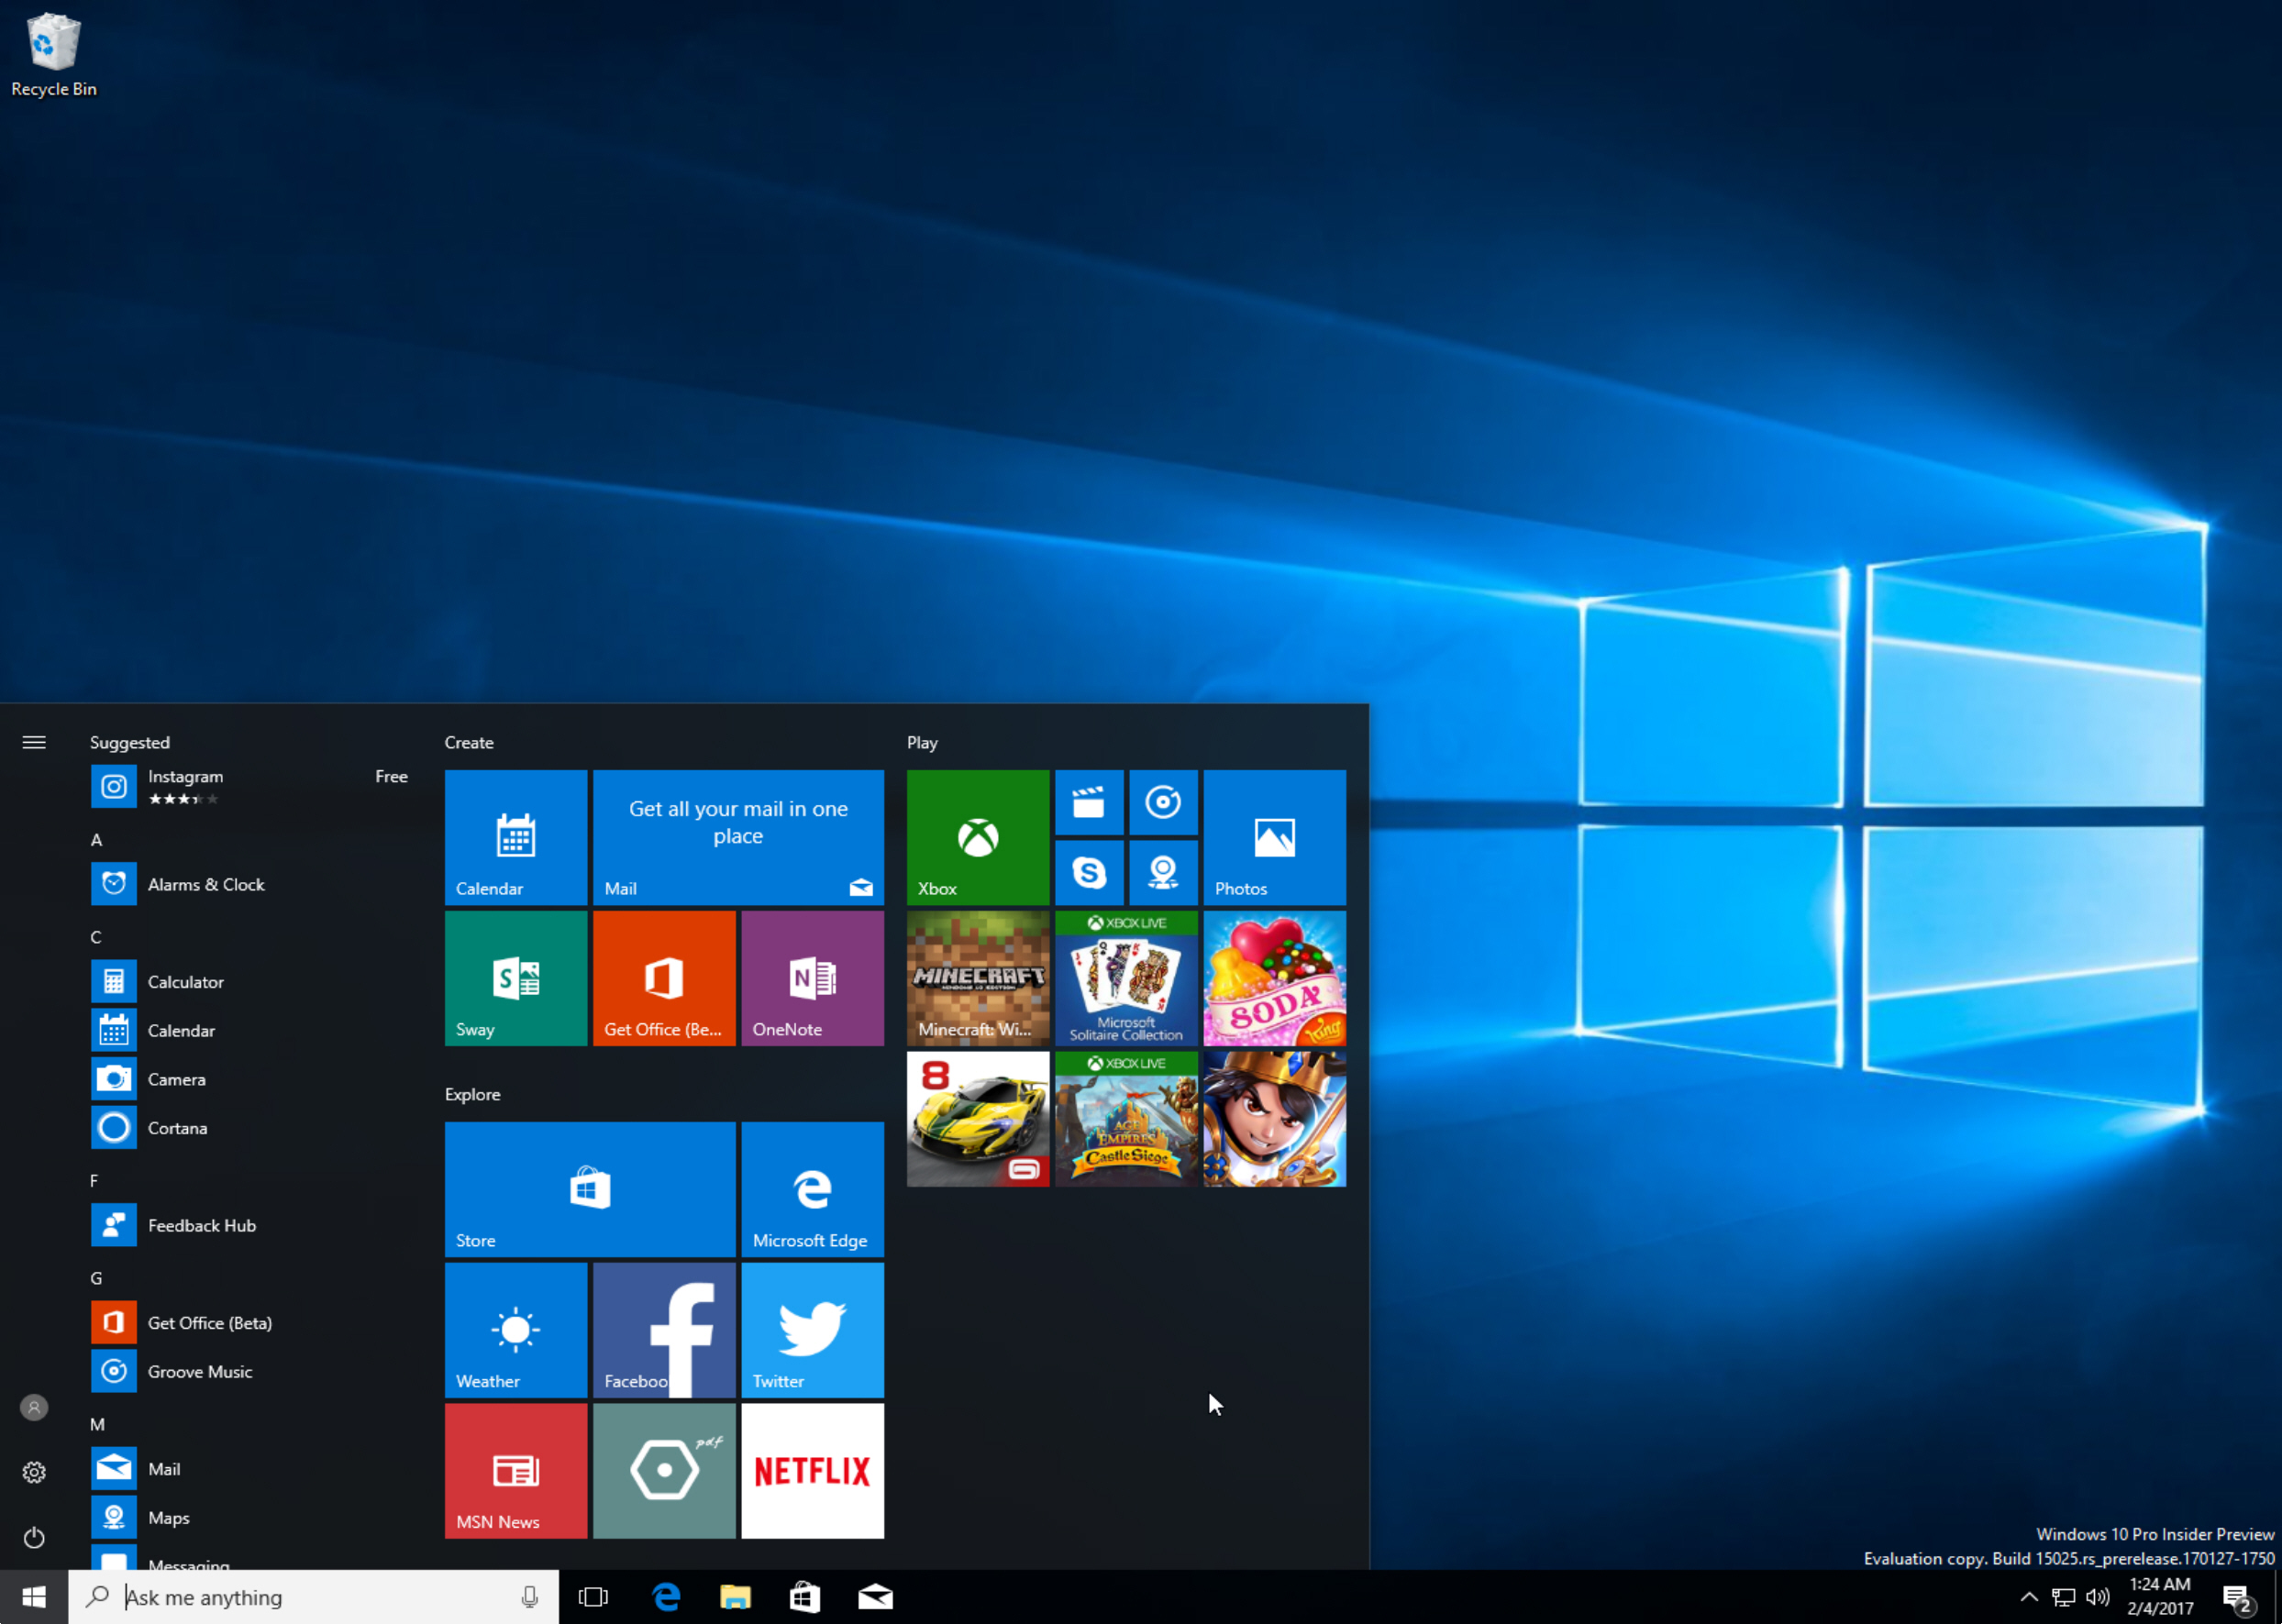 First build of Microsoft's unannounced Windows 10 Cloud leaks online